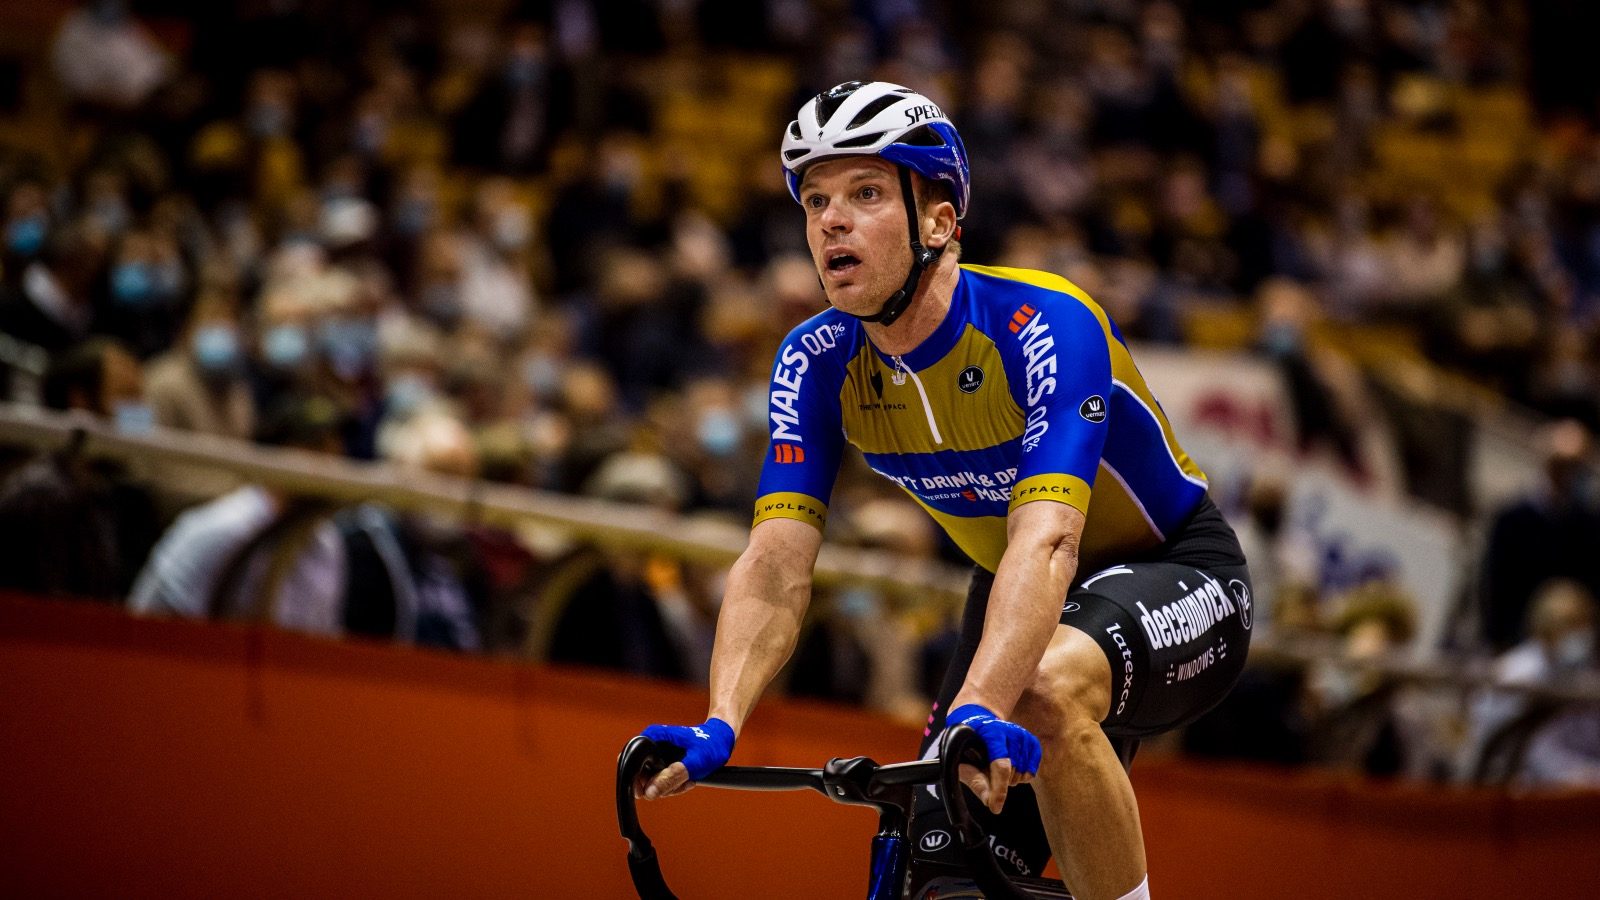 Belgian Iljo Keisse pictured in action during the first day of the Zesdaagse Vlaanderen-Gent six-day indoor cycling race at the indoor cycling arena 't Kuipke, Tuesday 16 November 2021, in Gent. This year's edition takes place from November 16th until November 21st. BELGA PHOTO JASPER JACOBS